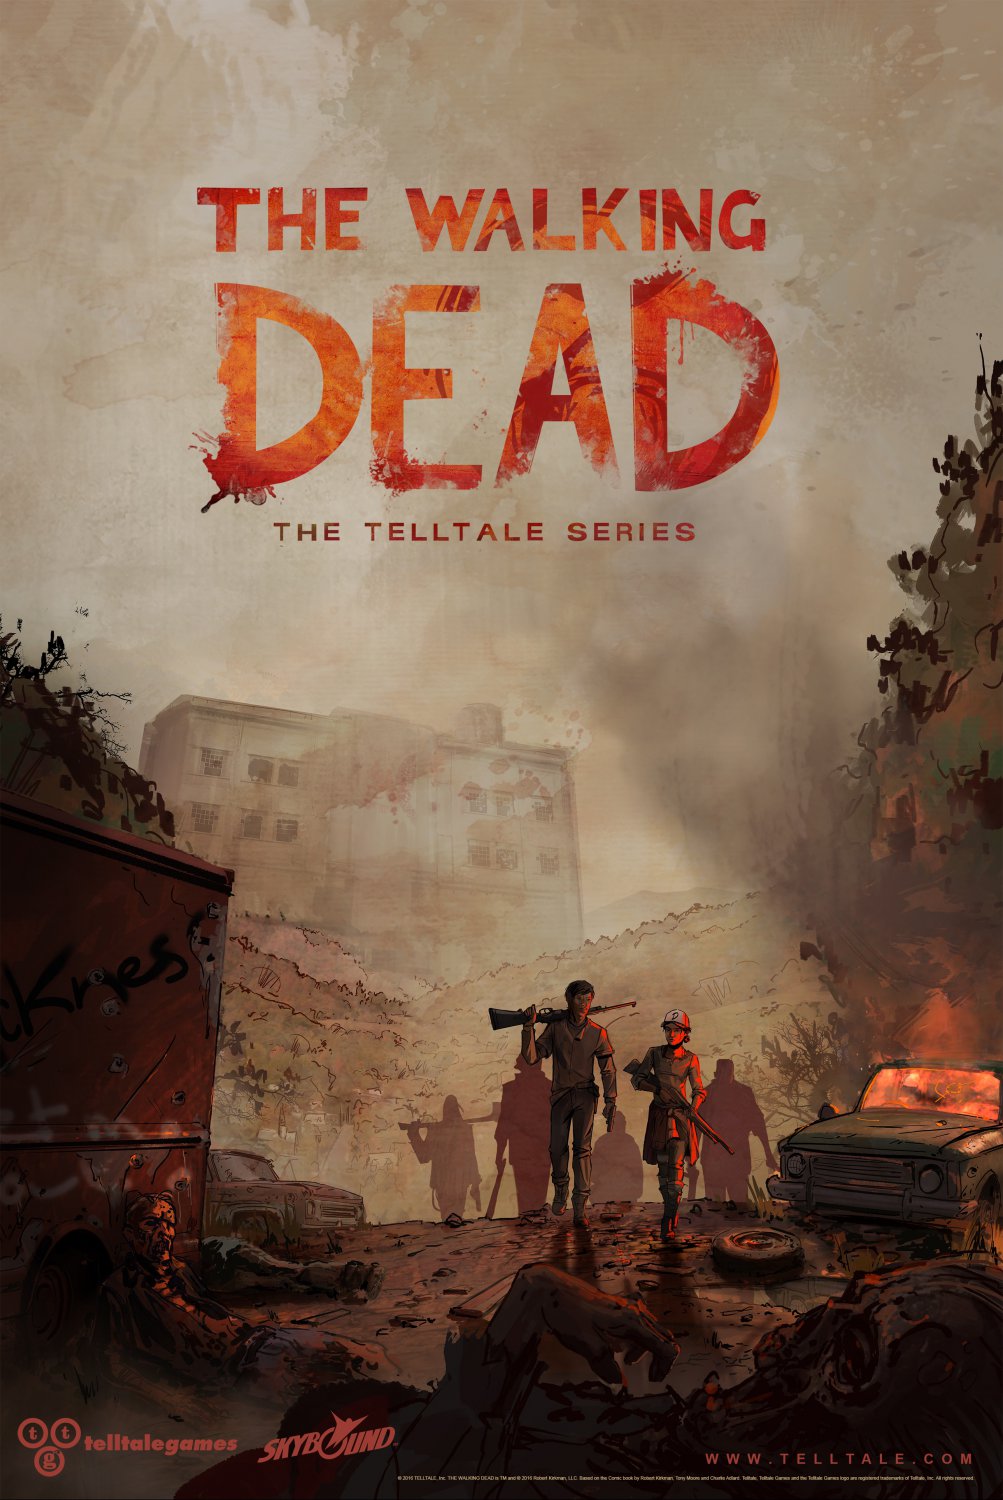 The Walking Dead Game 18"x28" (45cm/70cm) Poster